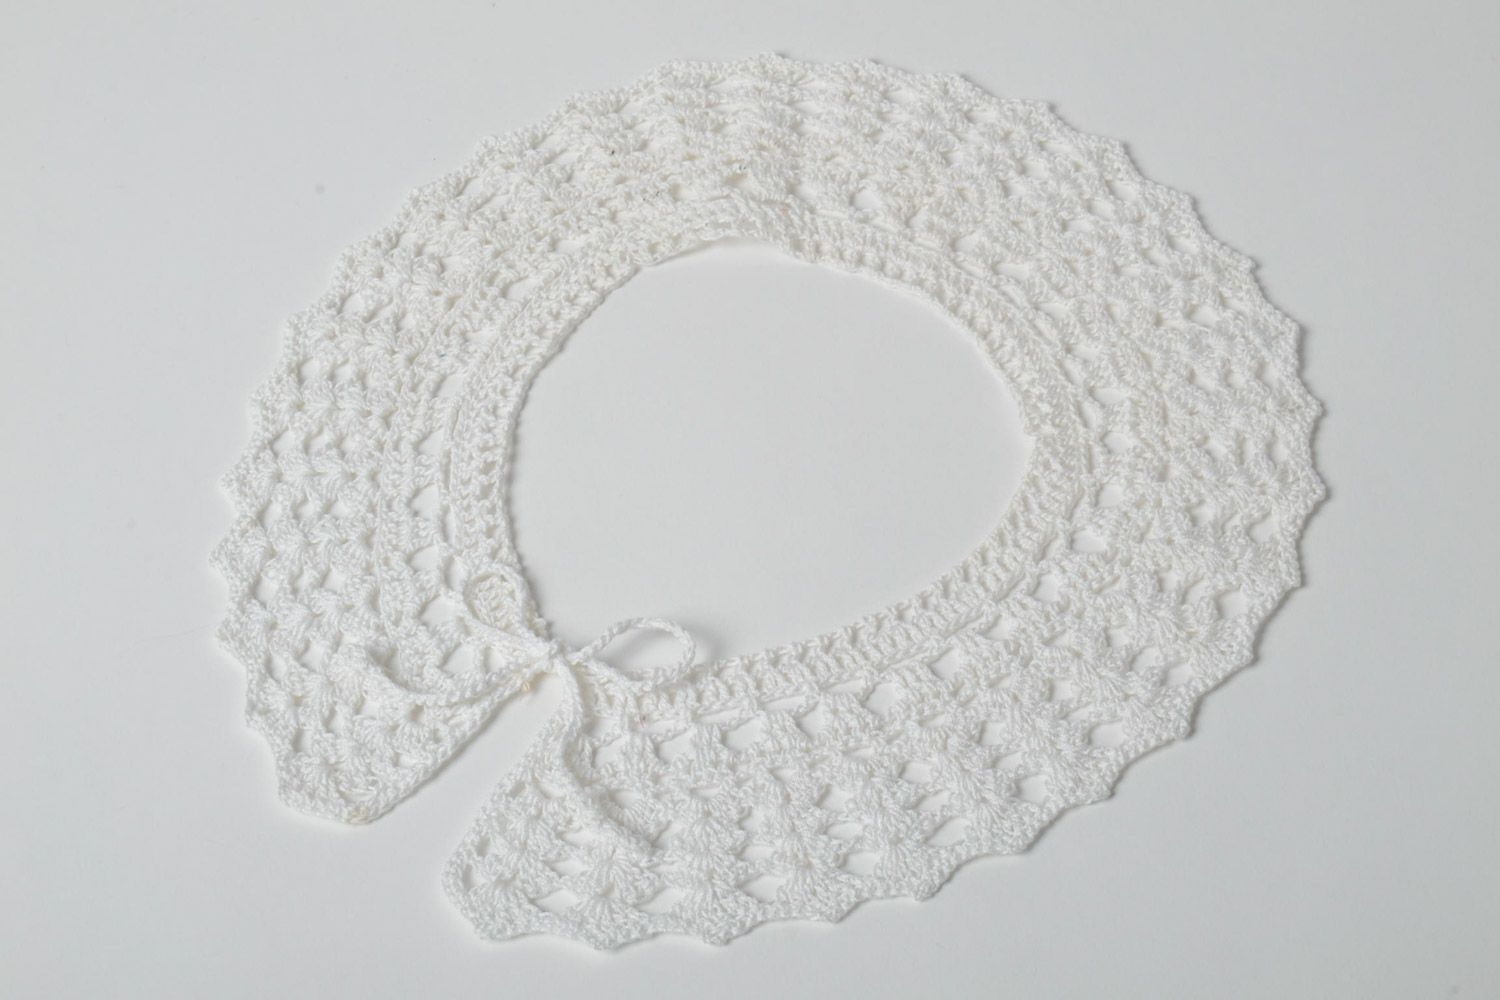 Handmade white lace detachable decorative collar crocheted of cotton threads photo 5